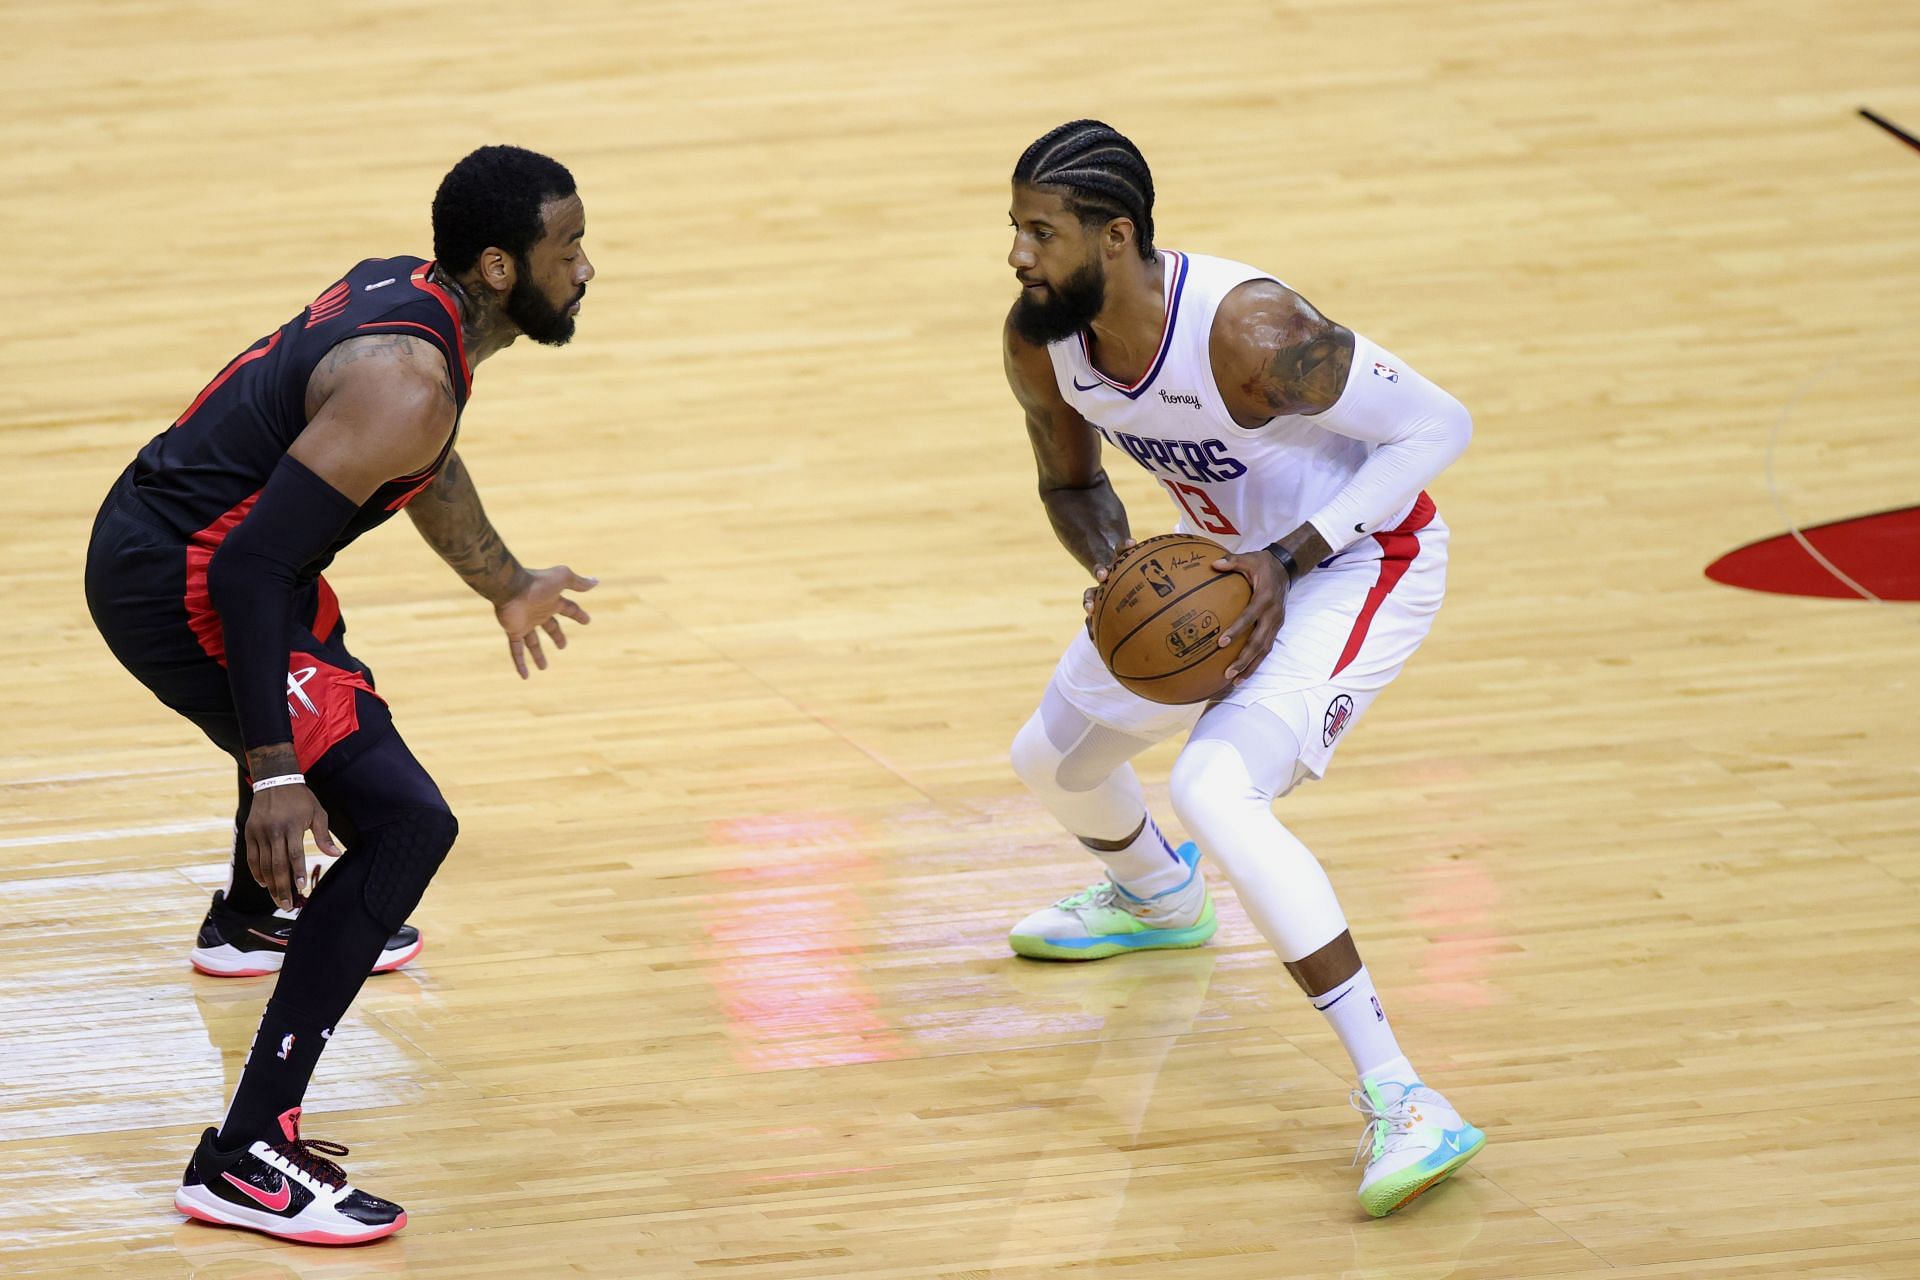 Paul George of the LA Clippers against John Wall of the Houston Rockets during the 2020-21 NBA season